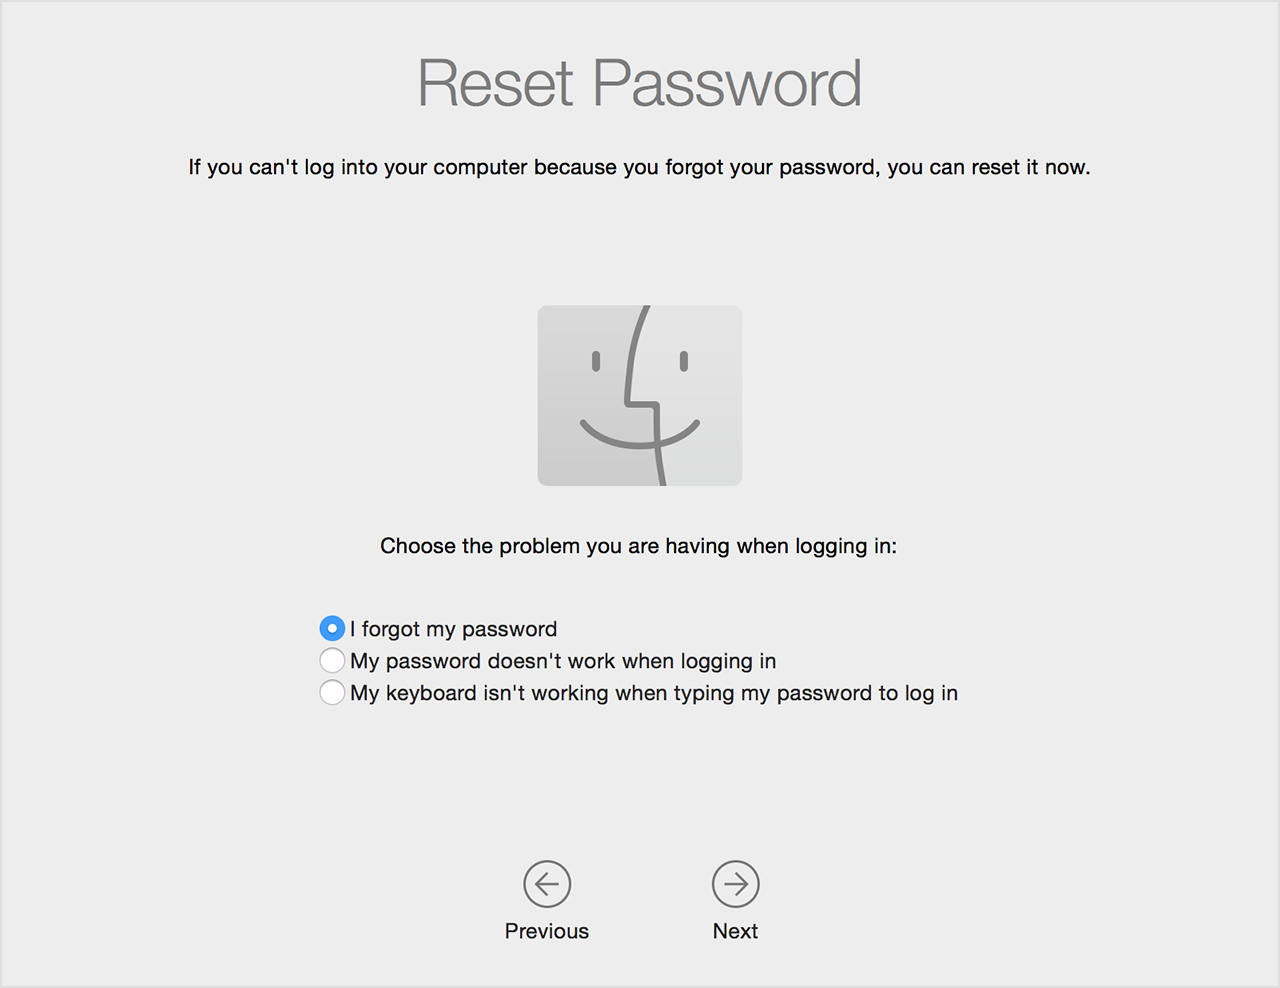 The reset password screen with the option to choose the problem you're having that is causing you to need to reset your password